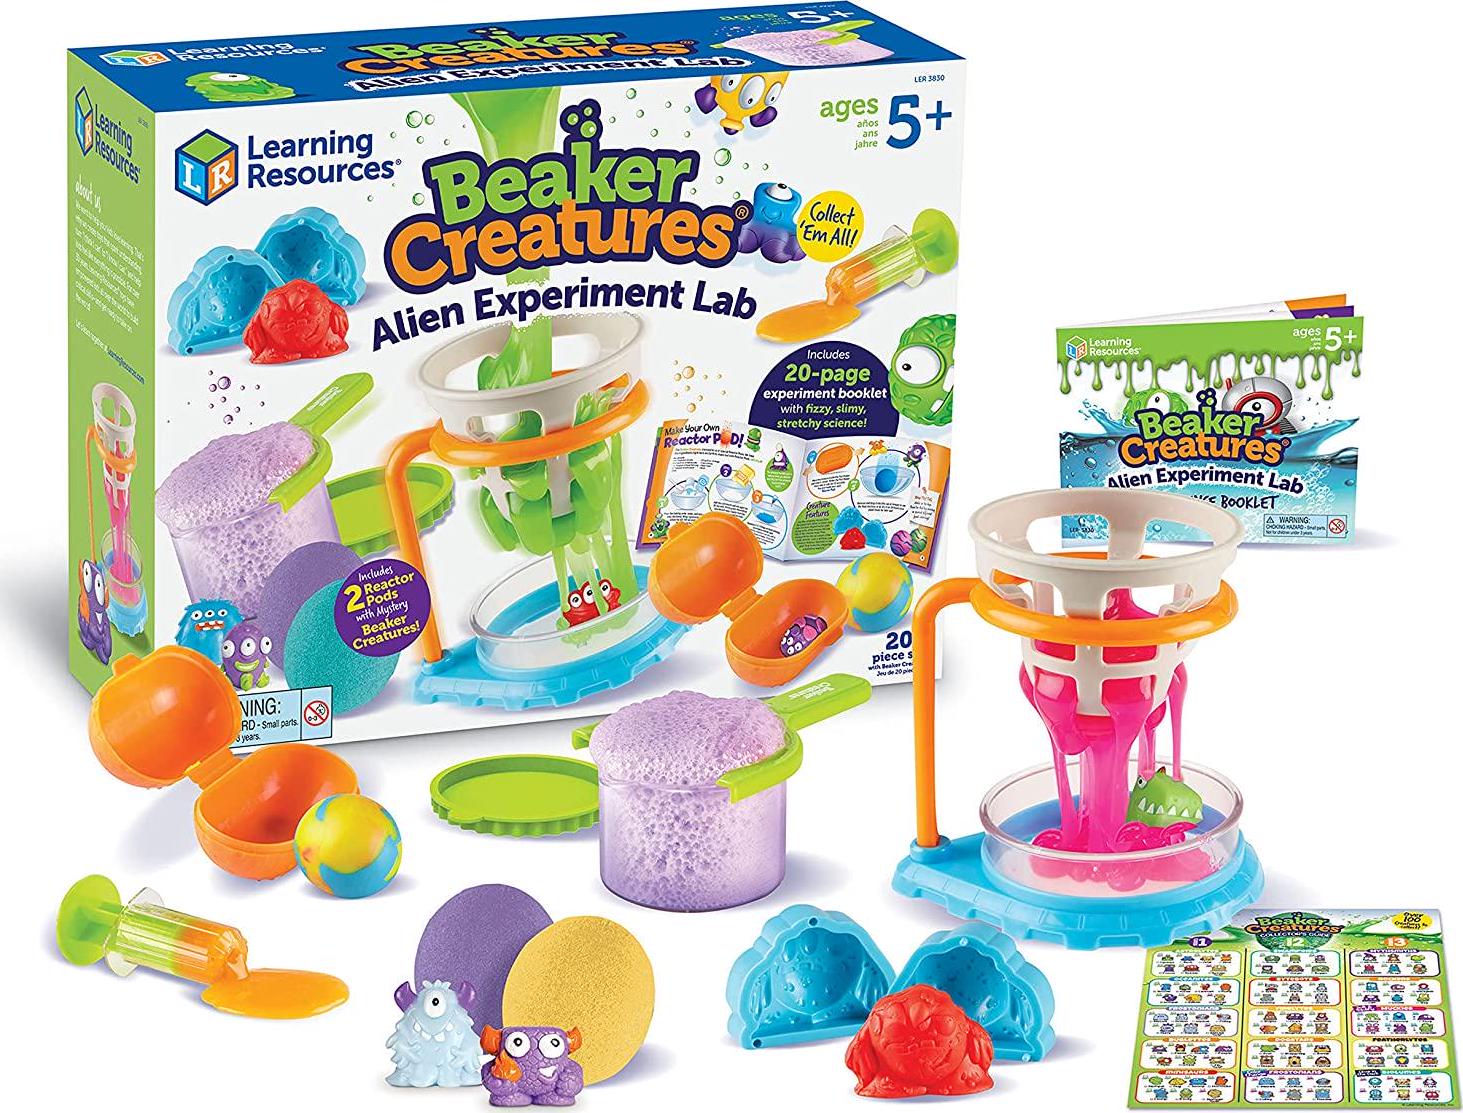 Learning Resources, Learning Resources Beaker Creatures Alien Experiment Lab, Homeschool Activity, Science Exploration, 18 Piece Set, for Kids, Ages 5+